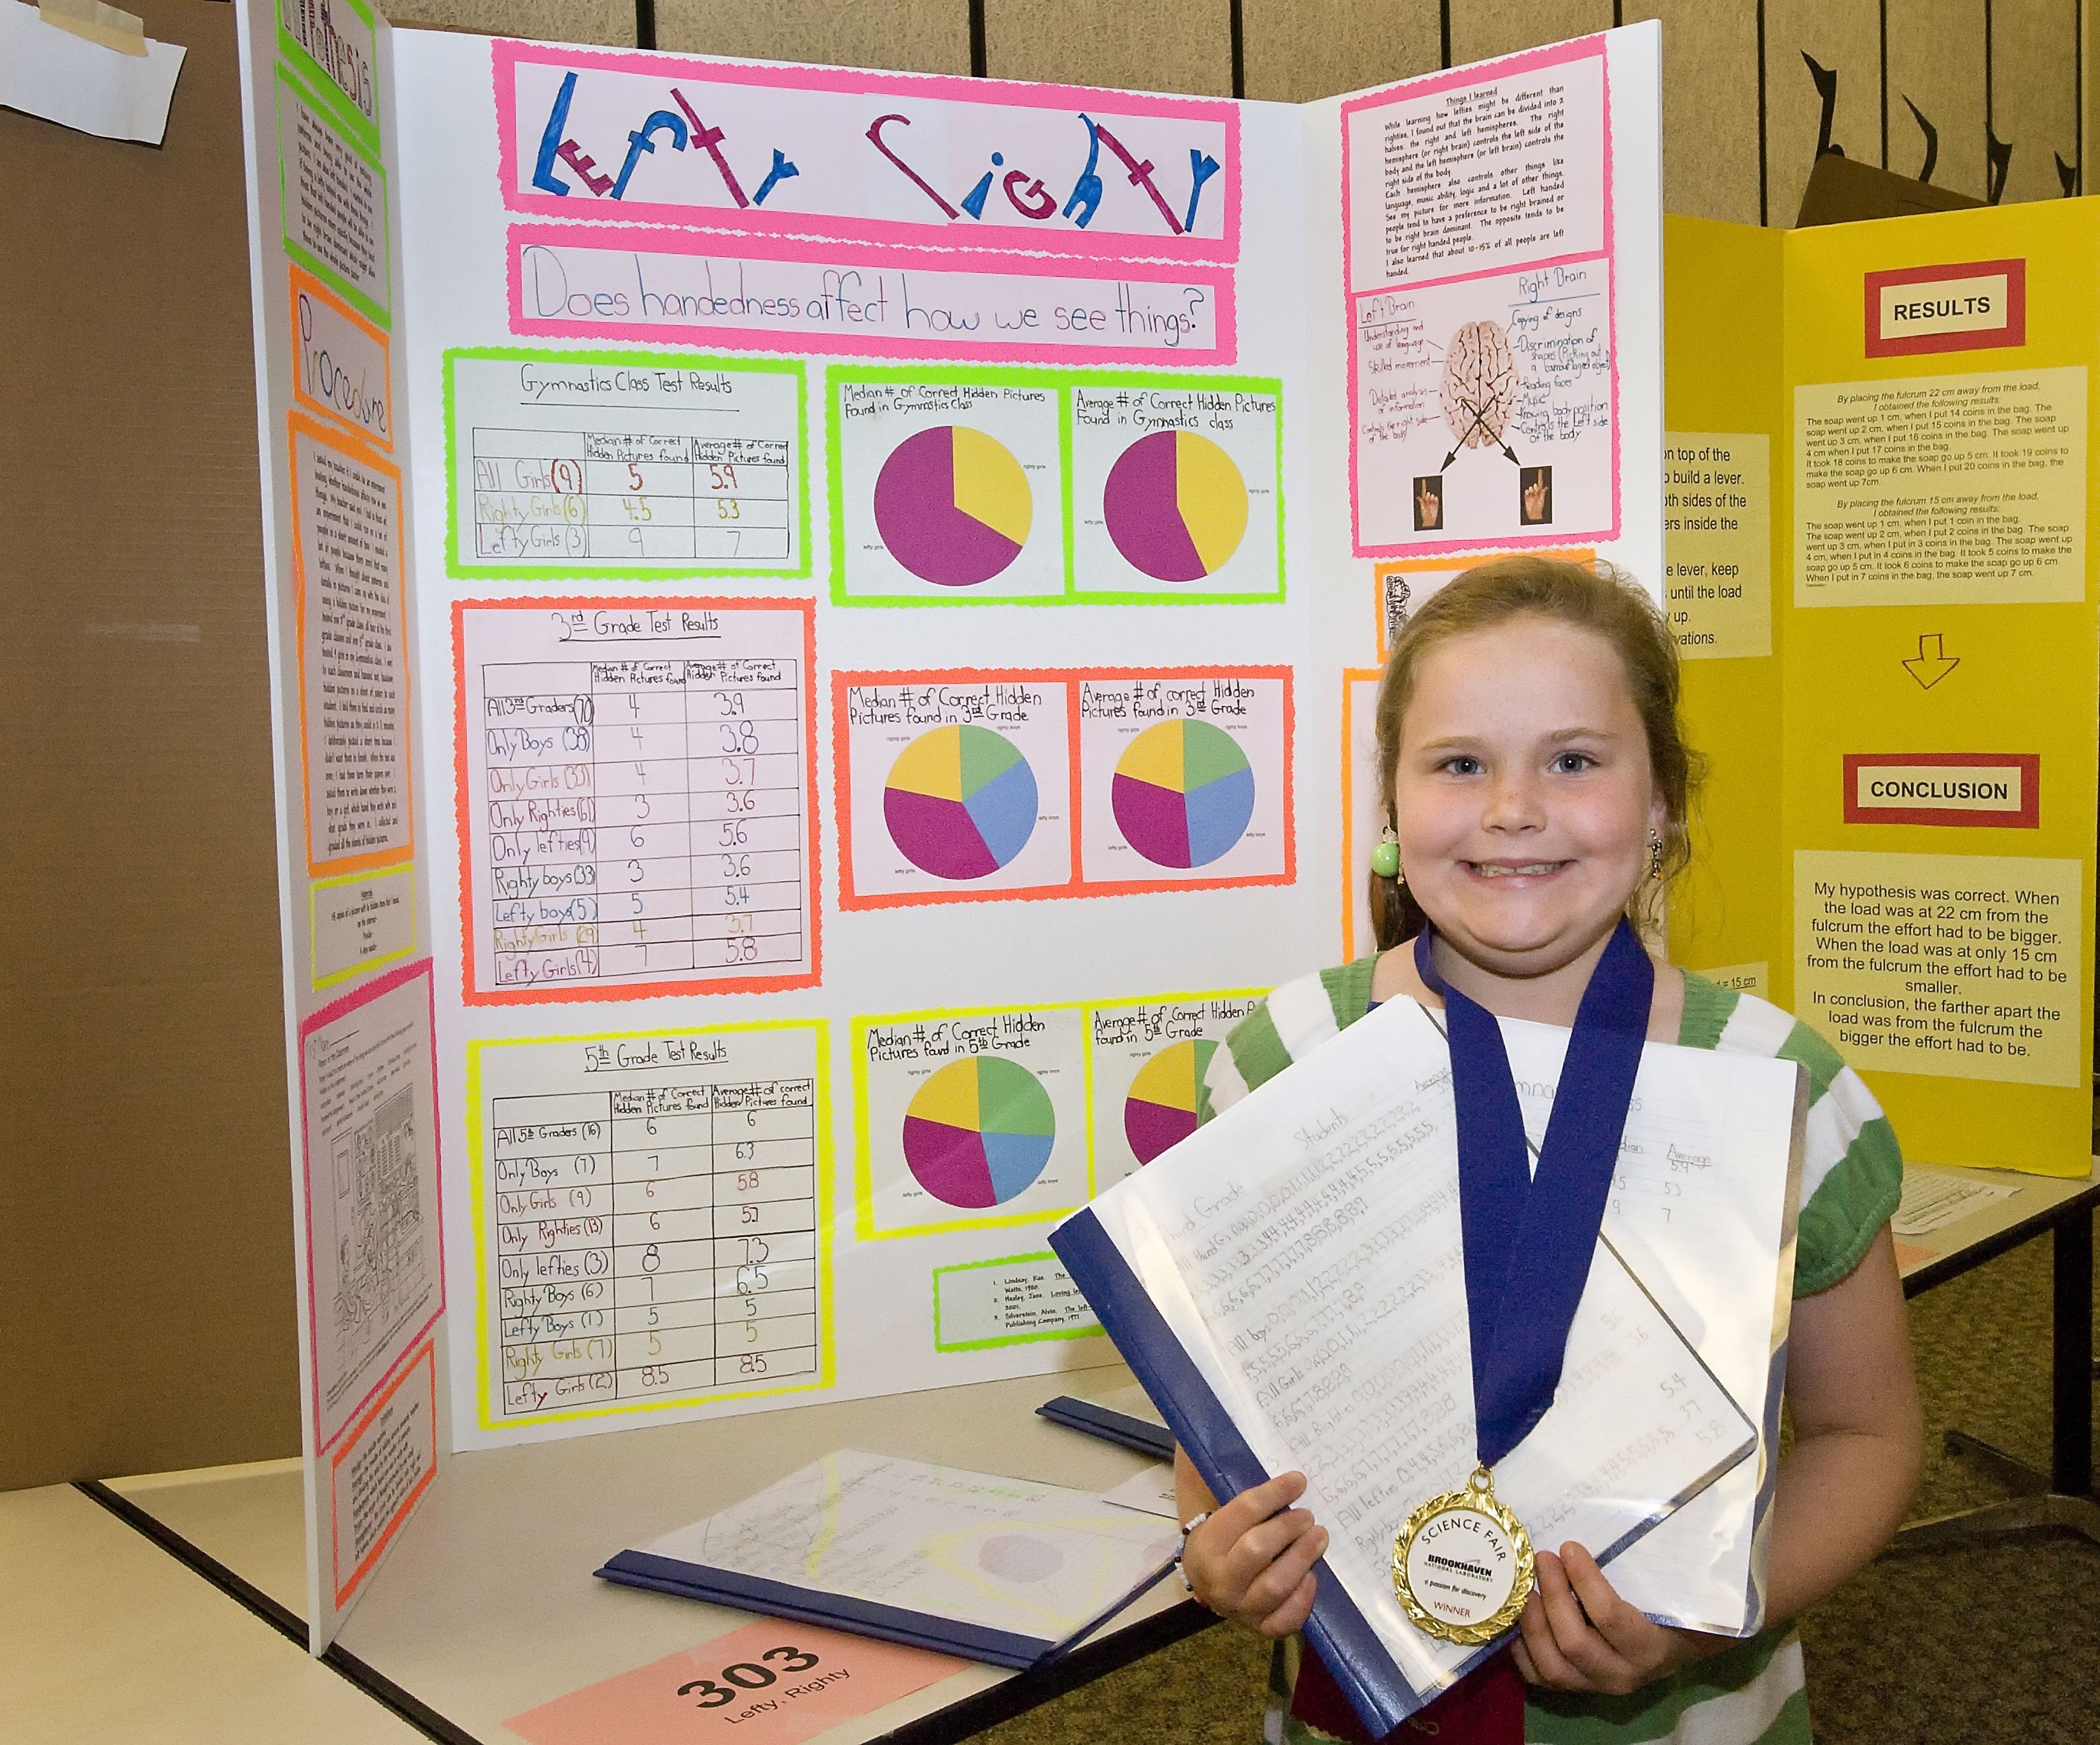 10 Attractive Science Fair Project Ideas For 4Th Grade 3rd grade science fair project ideas learning tools pinterest 6 2022